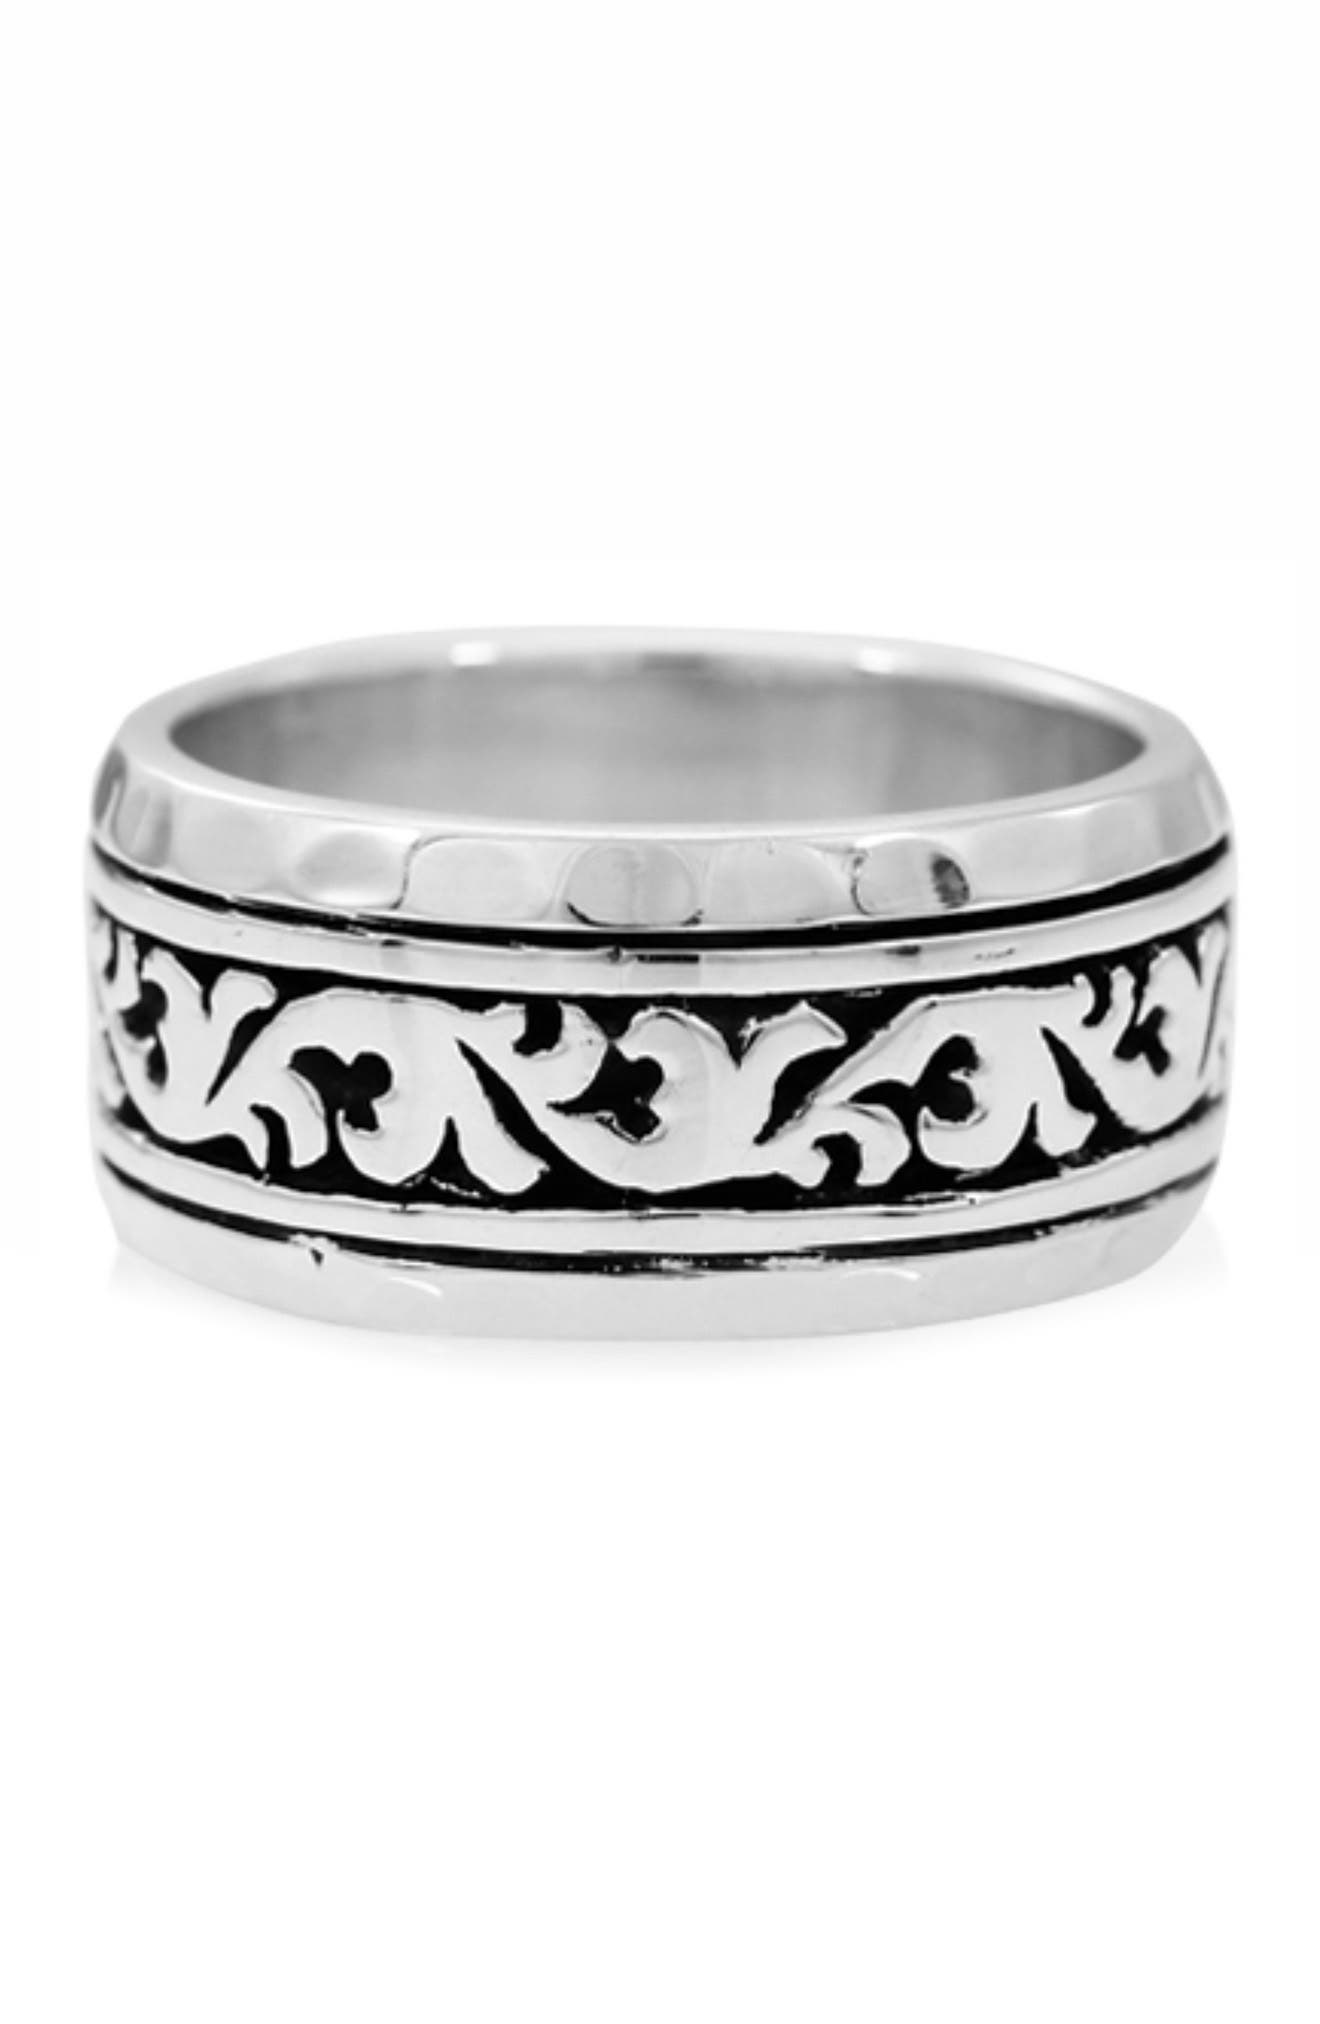 Lois Hill Sterling Silver Filigree Design Band Ring